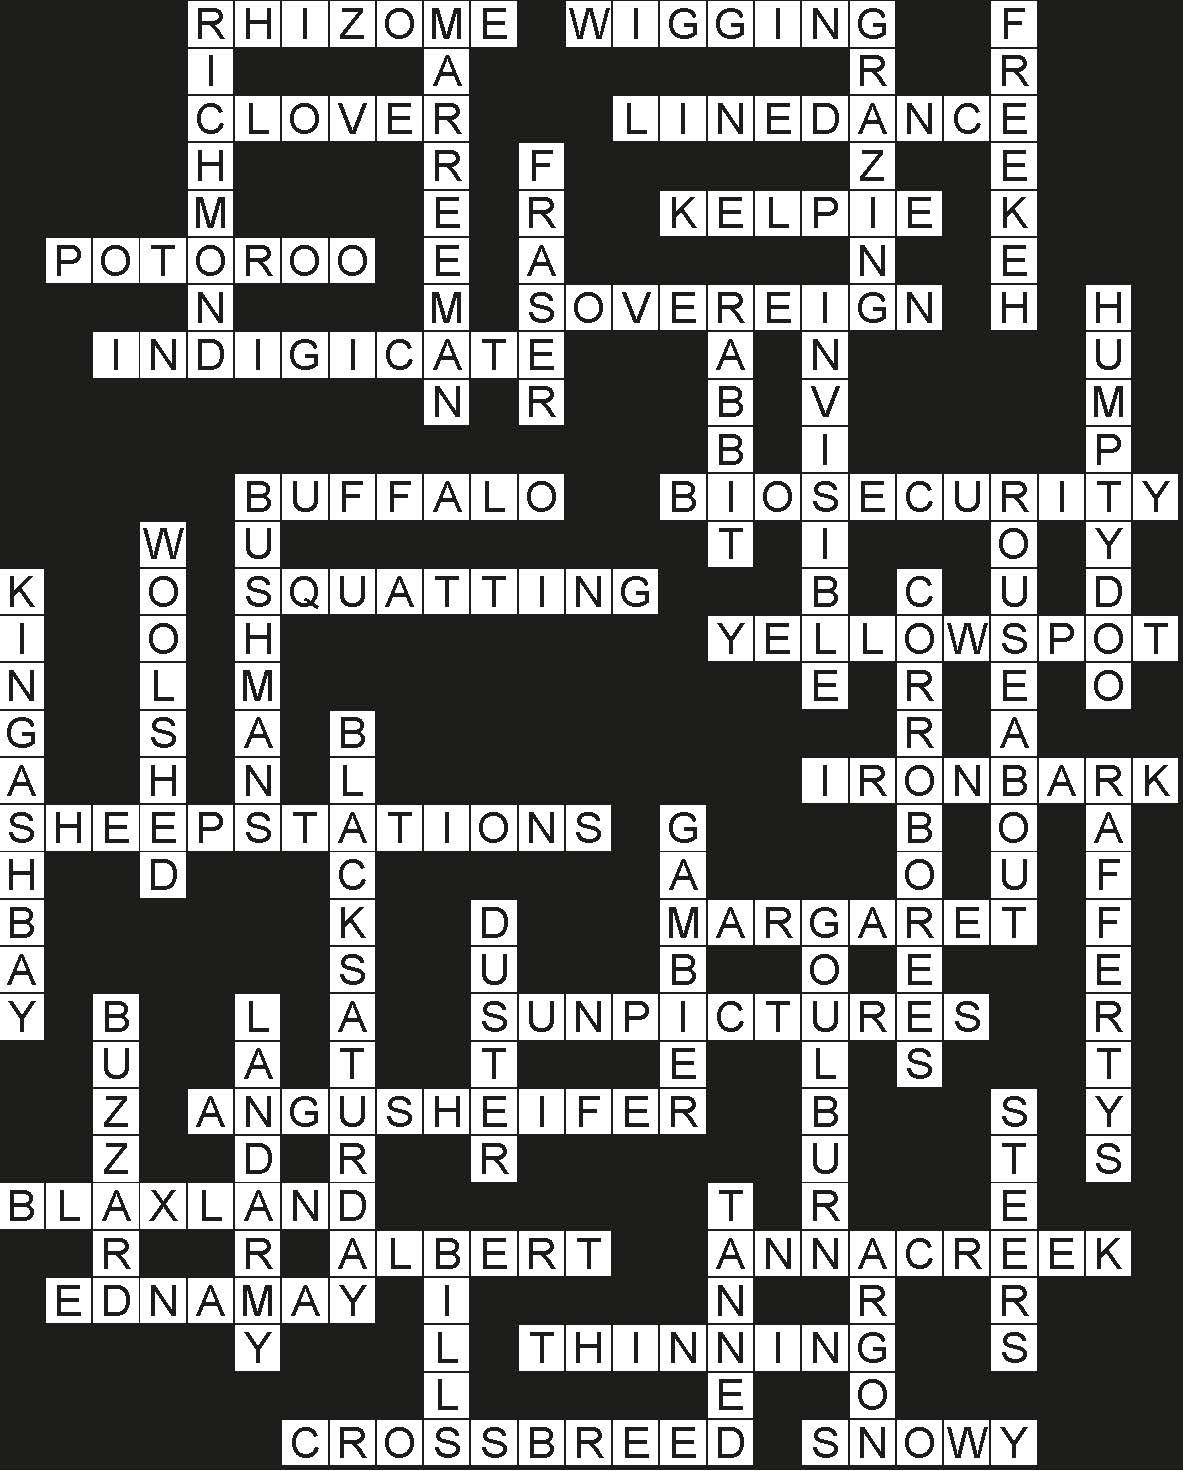 Outback crossword